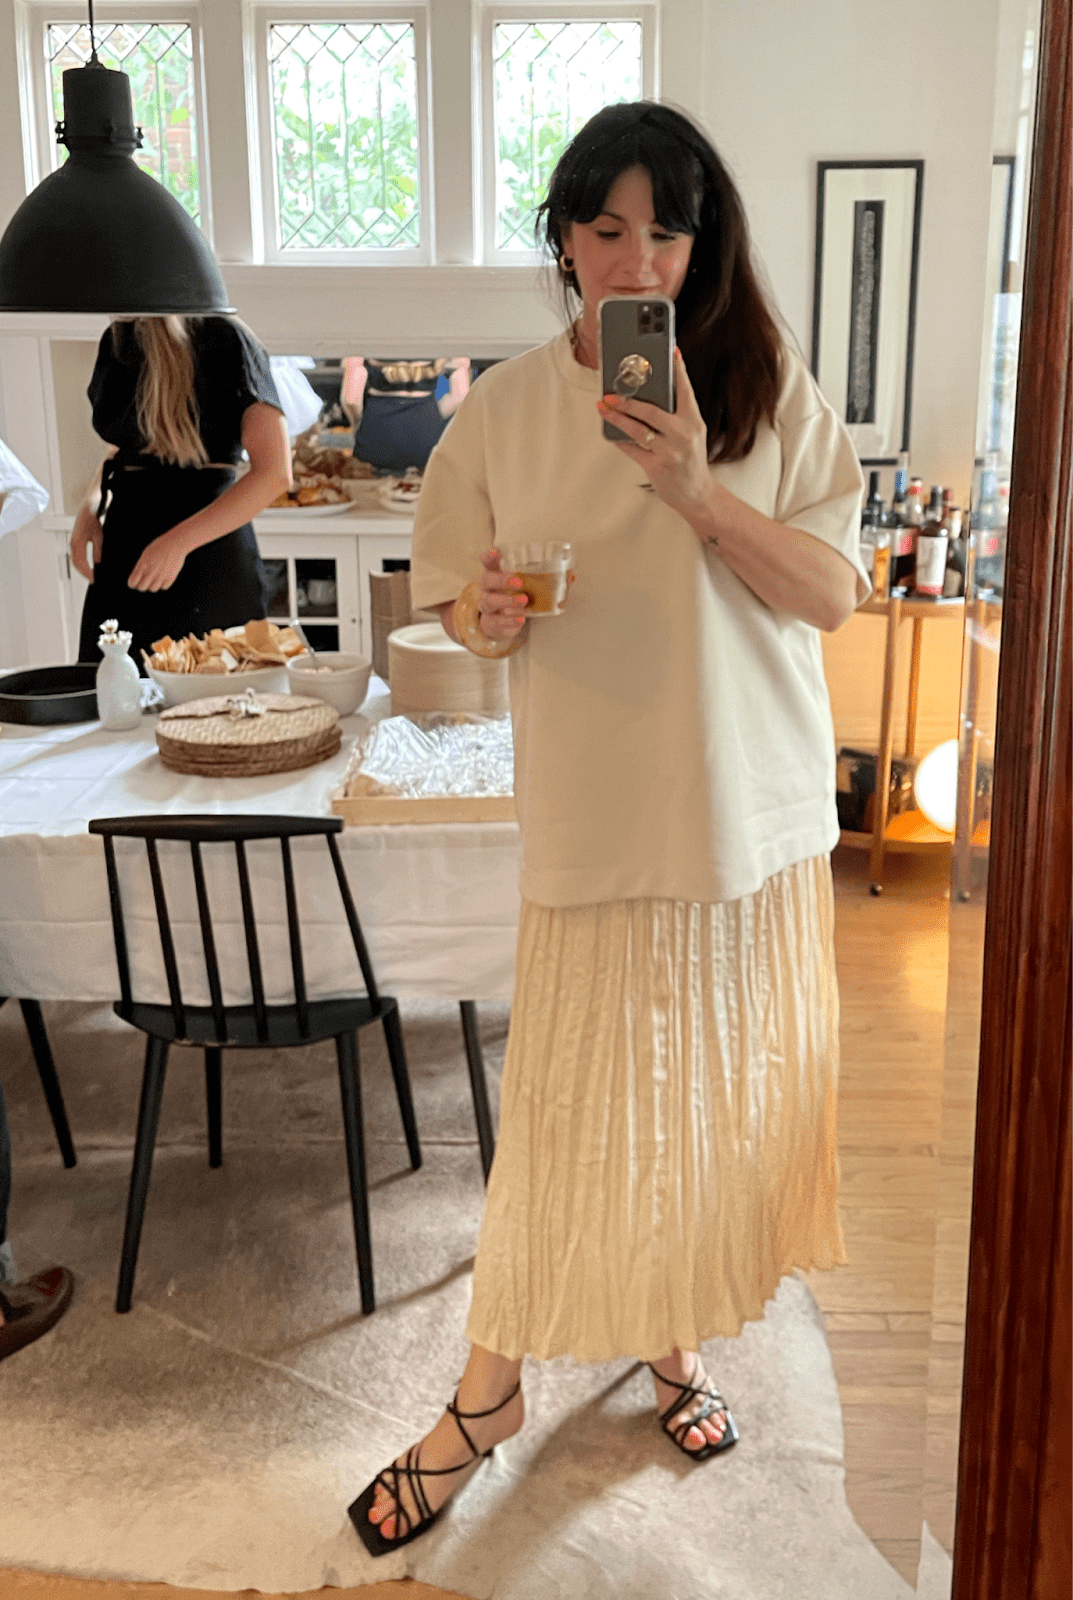 5 of My Favorite Outfits From June That Made Getting Dressed FUN